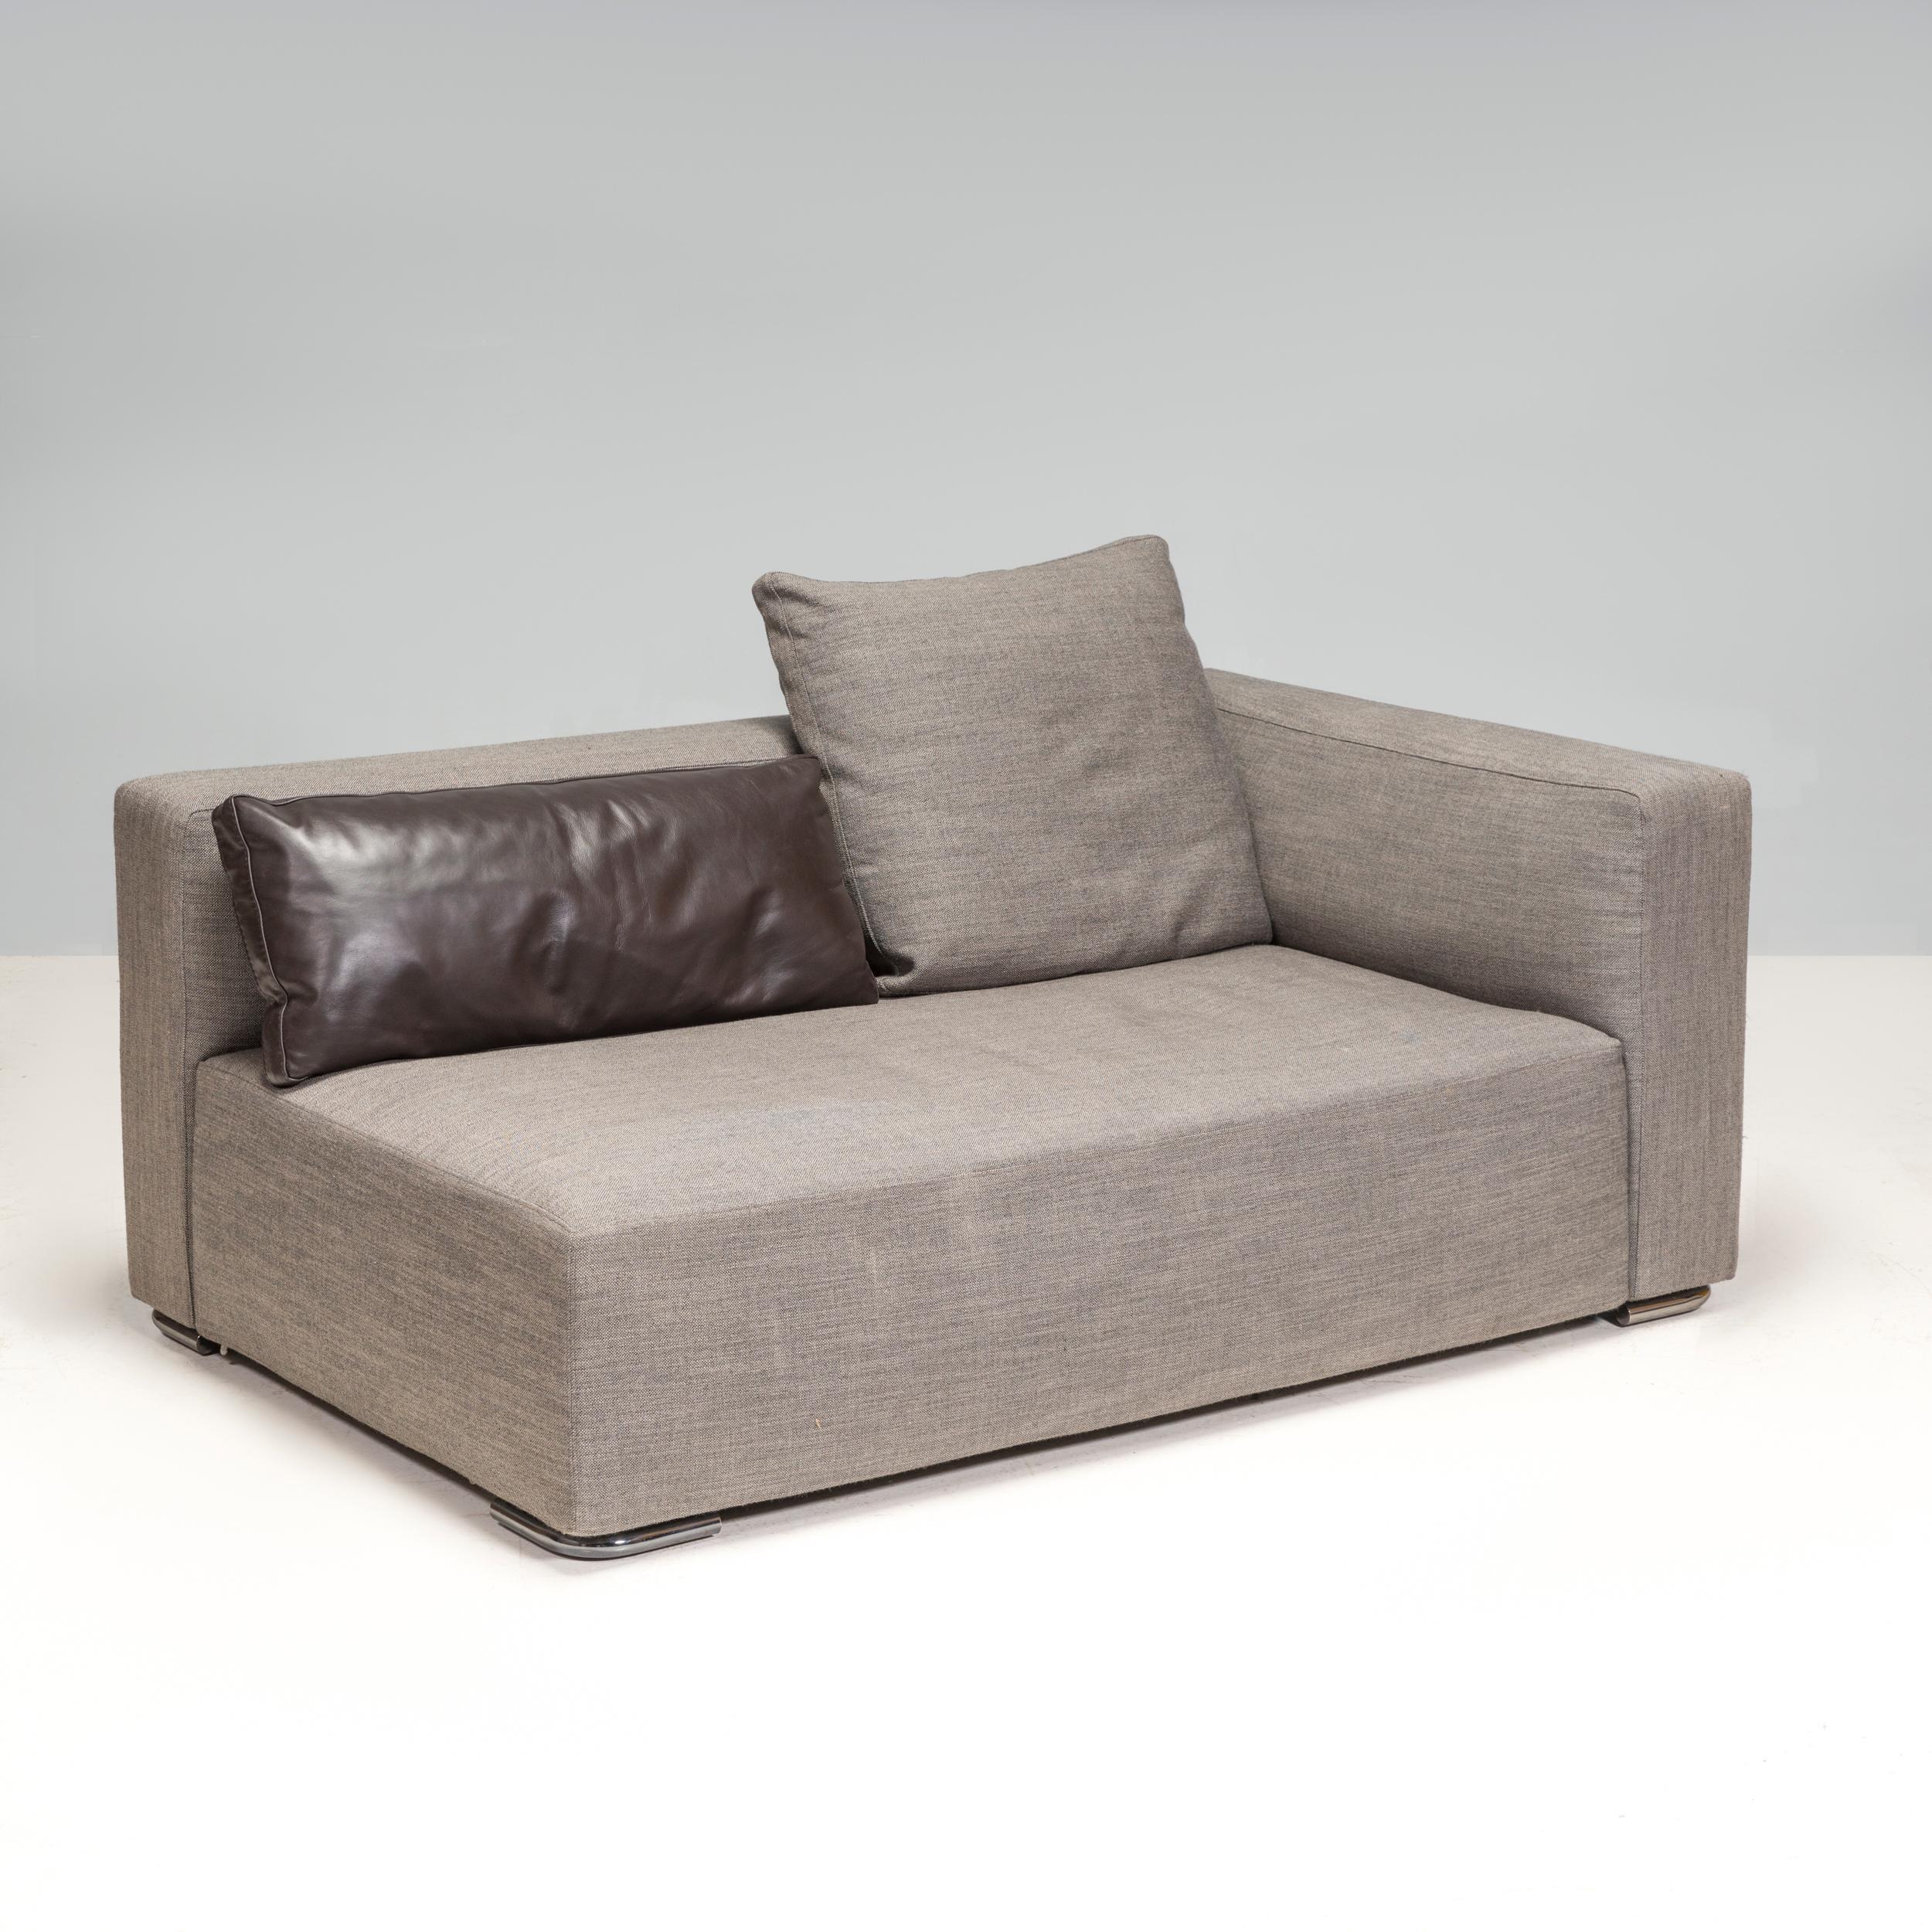 Designed by Rodolfo Dordoni for Minotti, the Donovan sofa embodies timeless Italian design. A one-piece seating system made up of a grouping of slender shapes that reveal a surprising softness.

Fully upholstered in grey fabric, the sofa has a